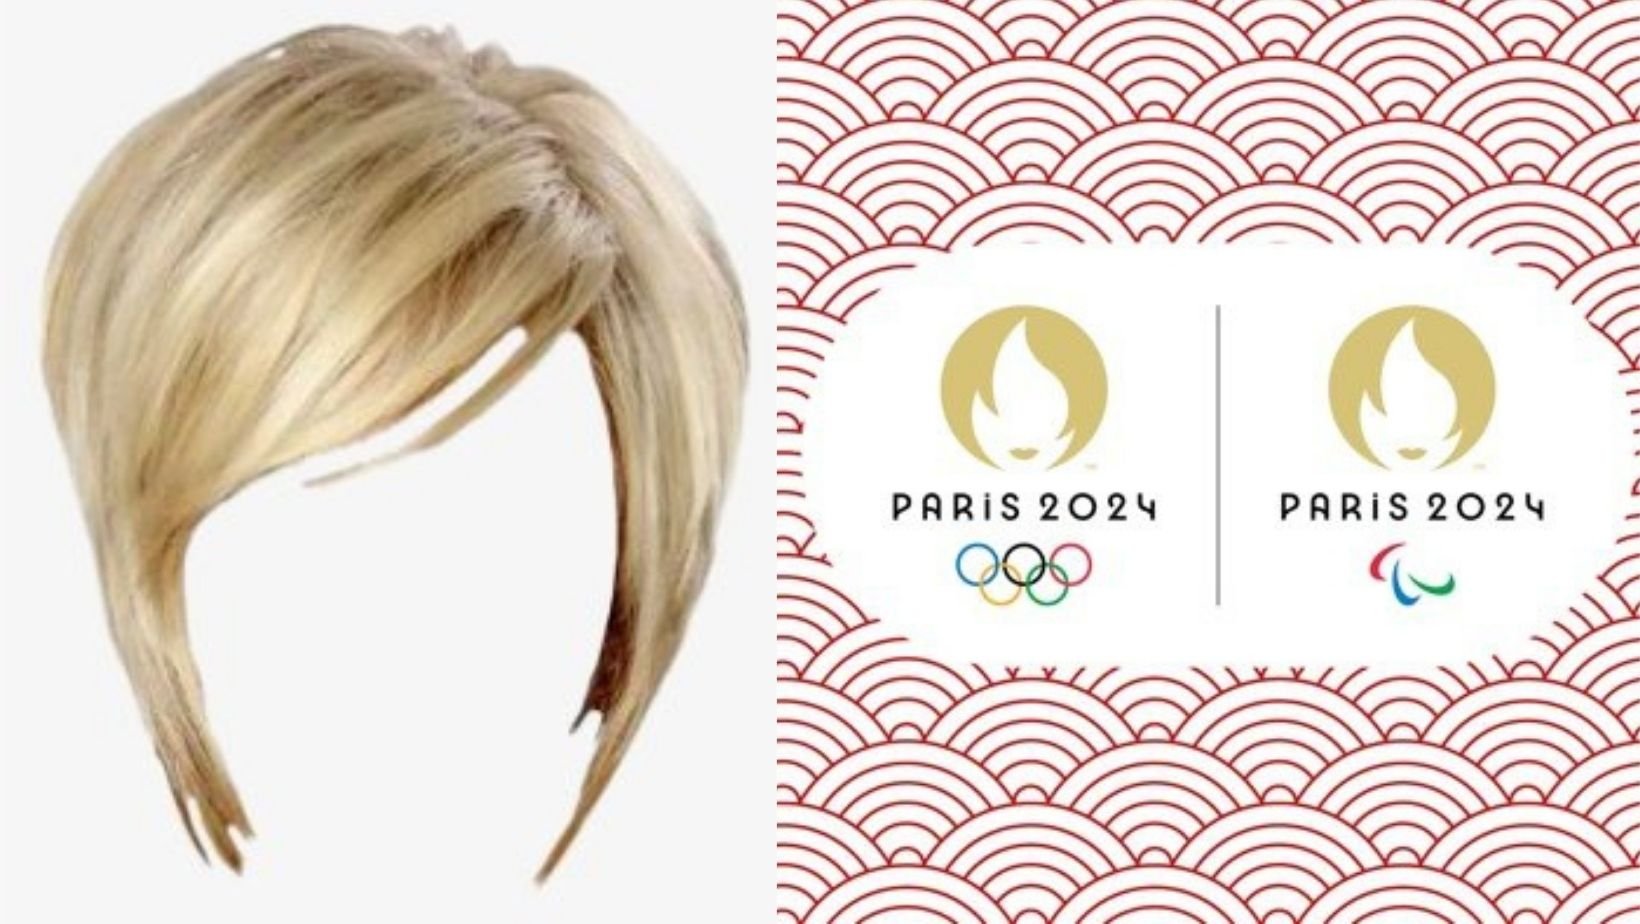 cover.jpg?resize=1200,630 - Paris' 2024 Olympics Logo Has Been Heavily Criticized For Looking Like A "Karen"